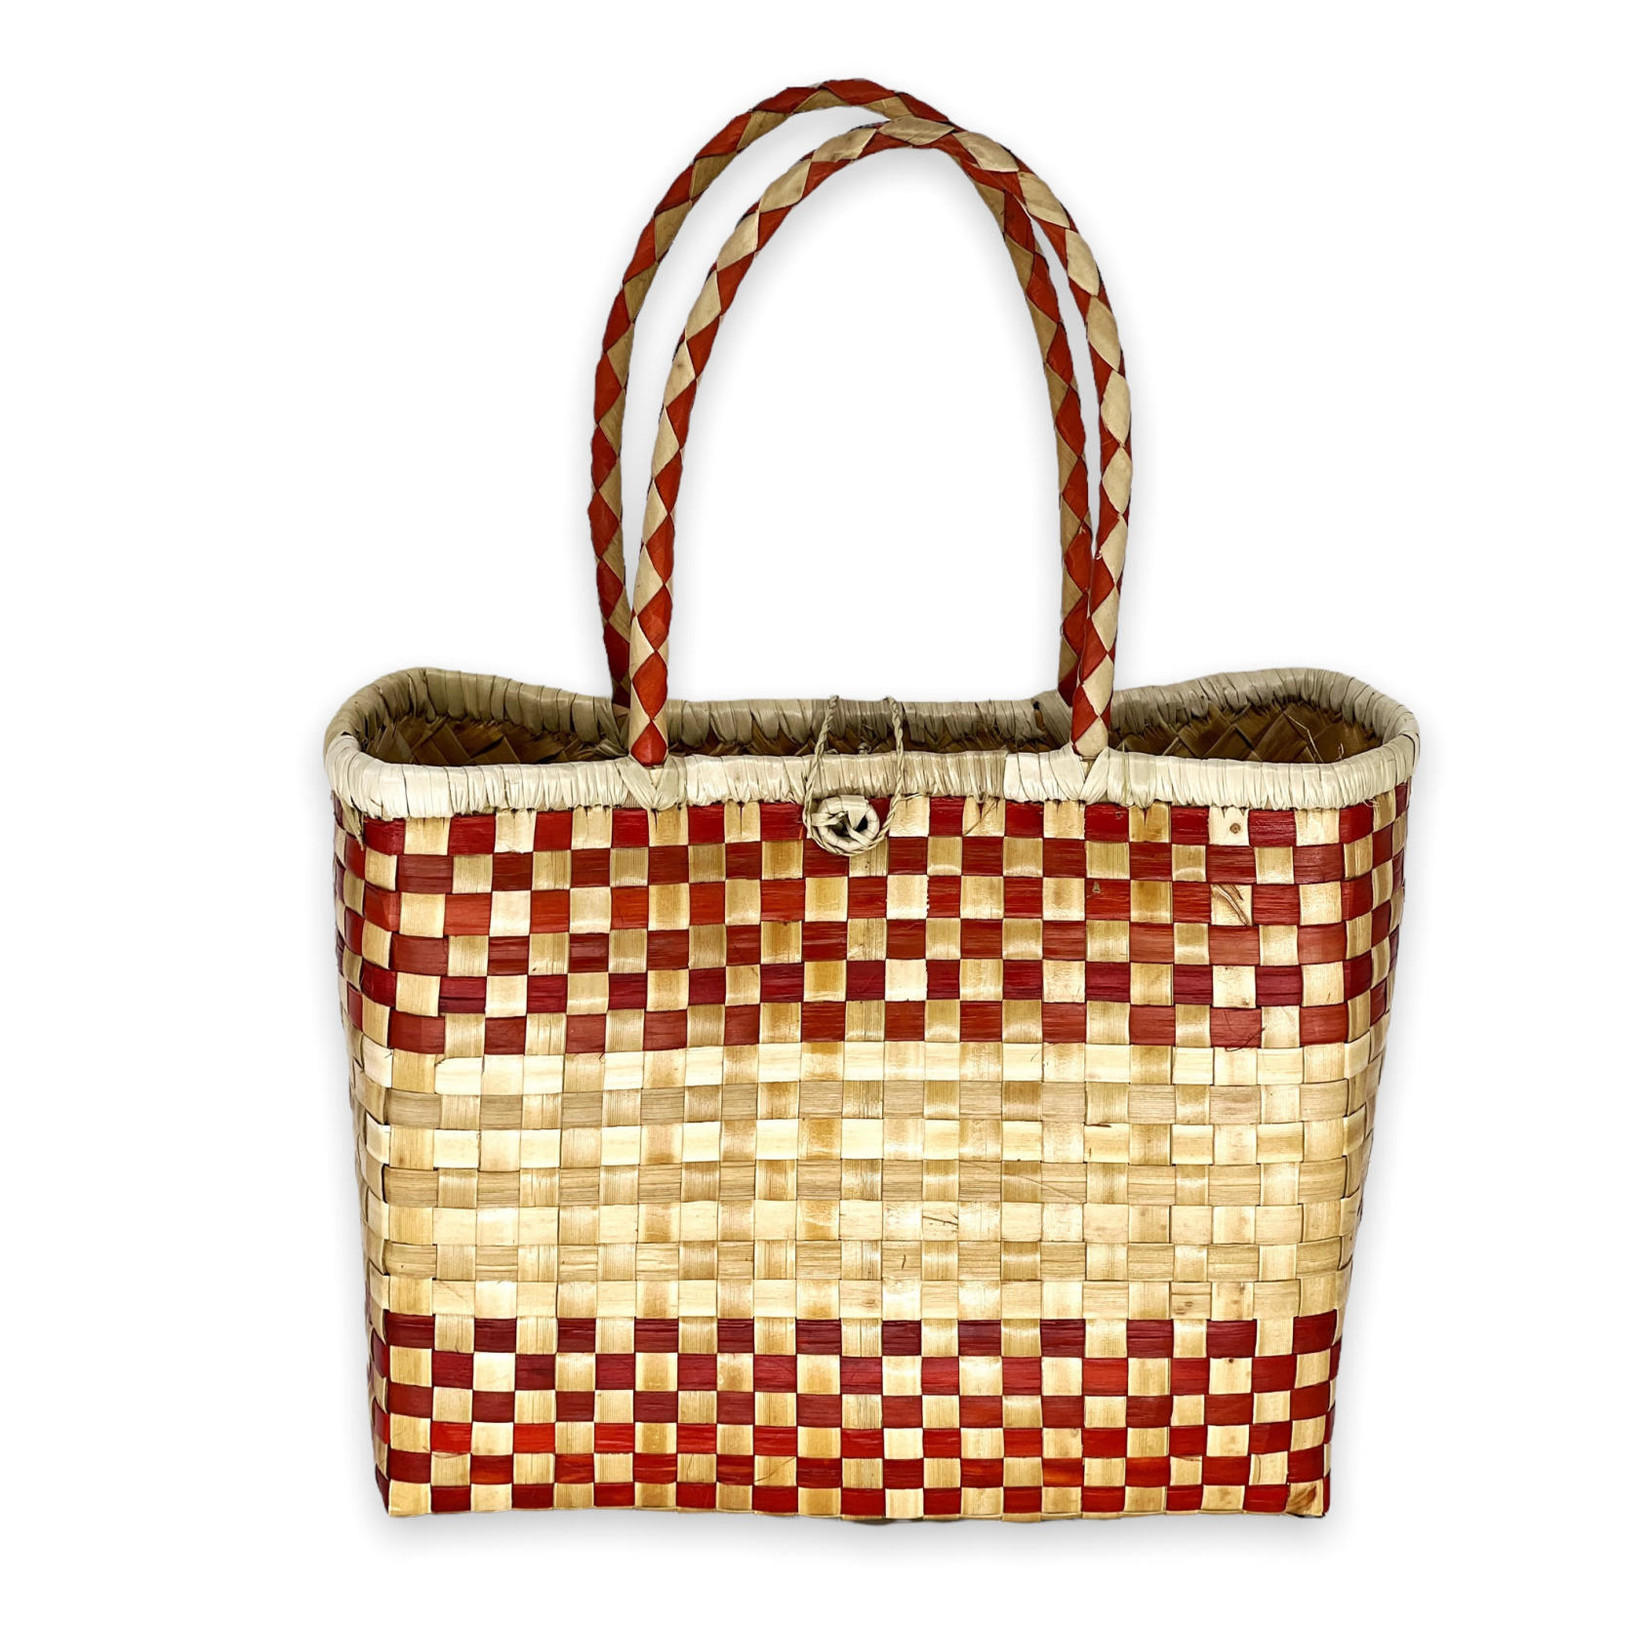 Two Tone Woven Lauhala Hula Bag Pikake *AVAILABLE IN 4 SIZES*